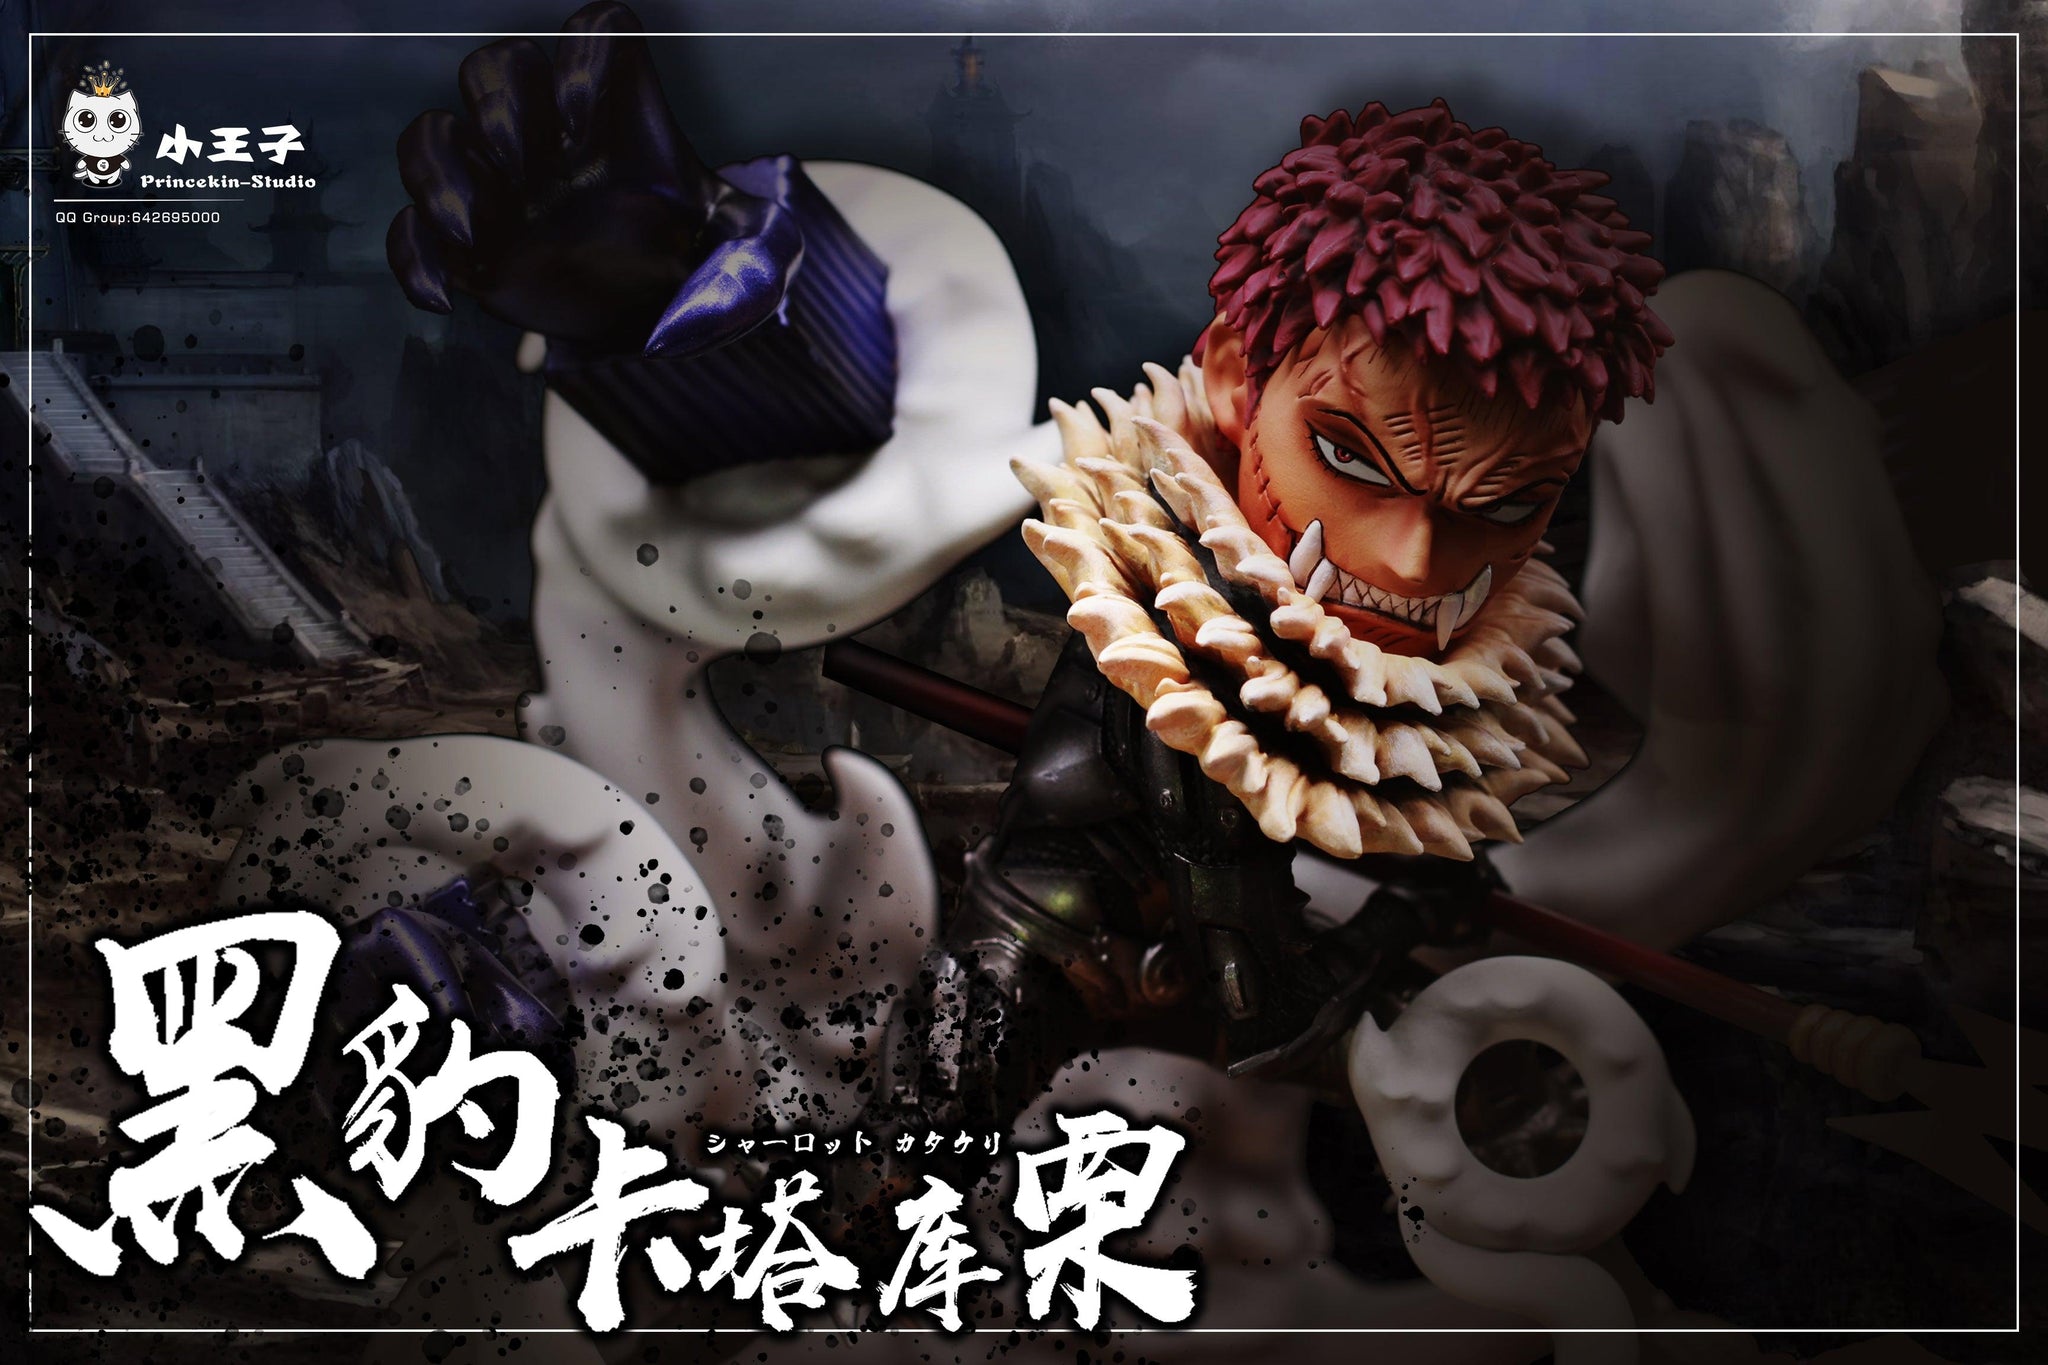 Sd Scale Charlotte Katakuri Cosplay Black Panther One Piece The Aven Favorgk